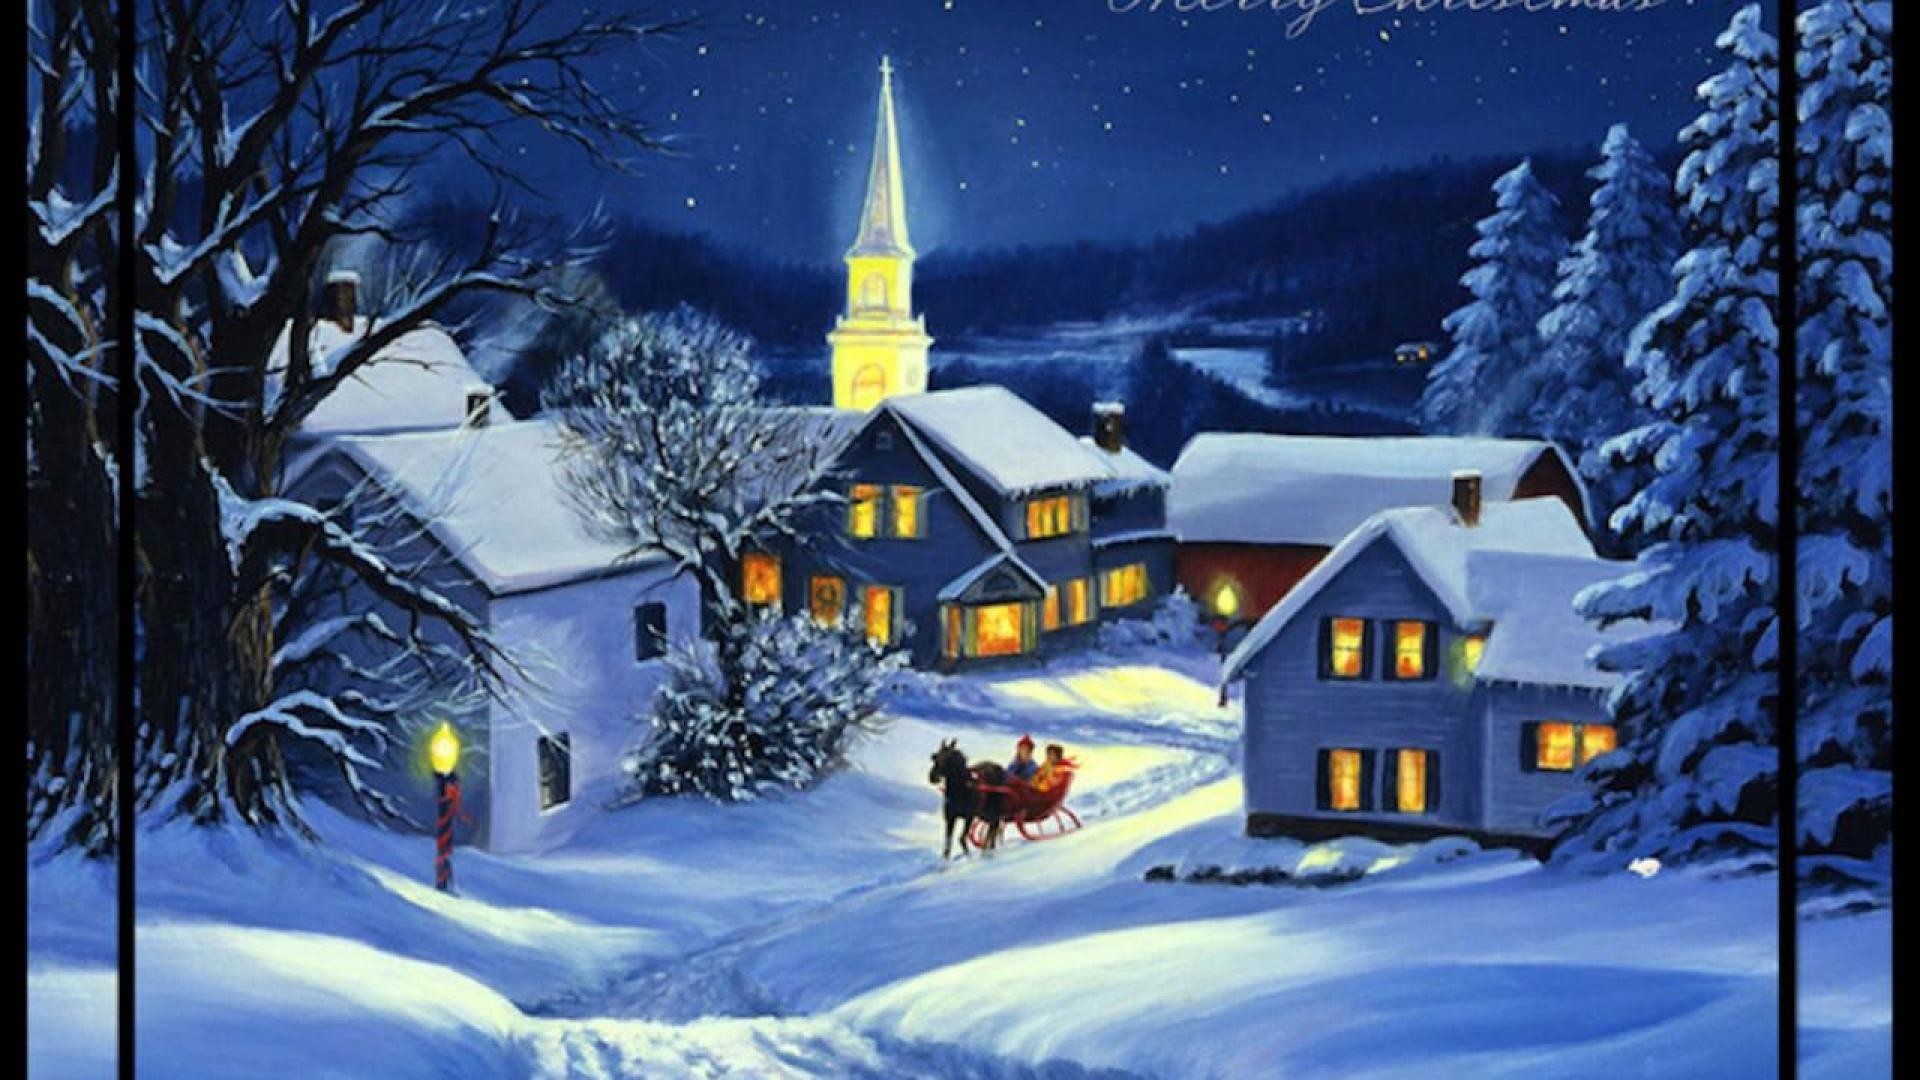 1920x1080 NIGHT BEFORE CHRISTMAS WALLPAPER - (#65556) - HD Wallpapers .